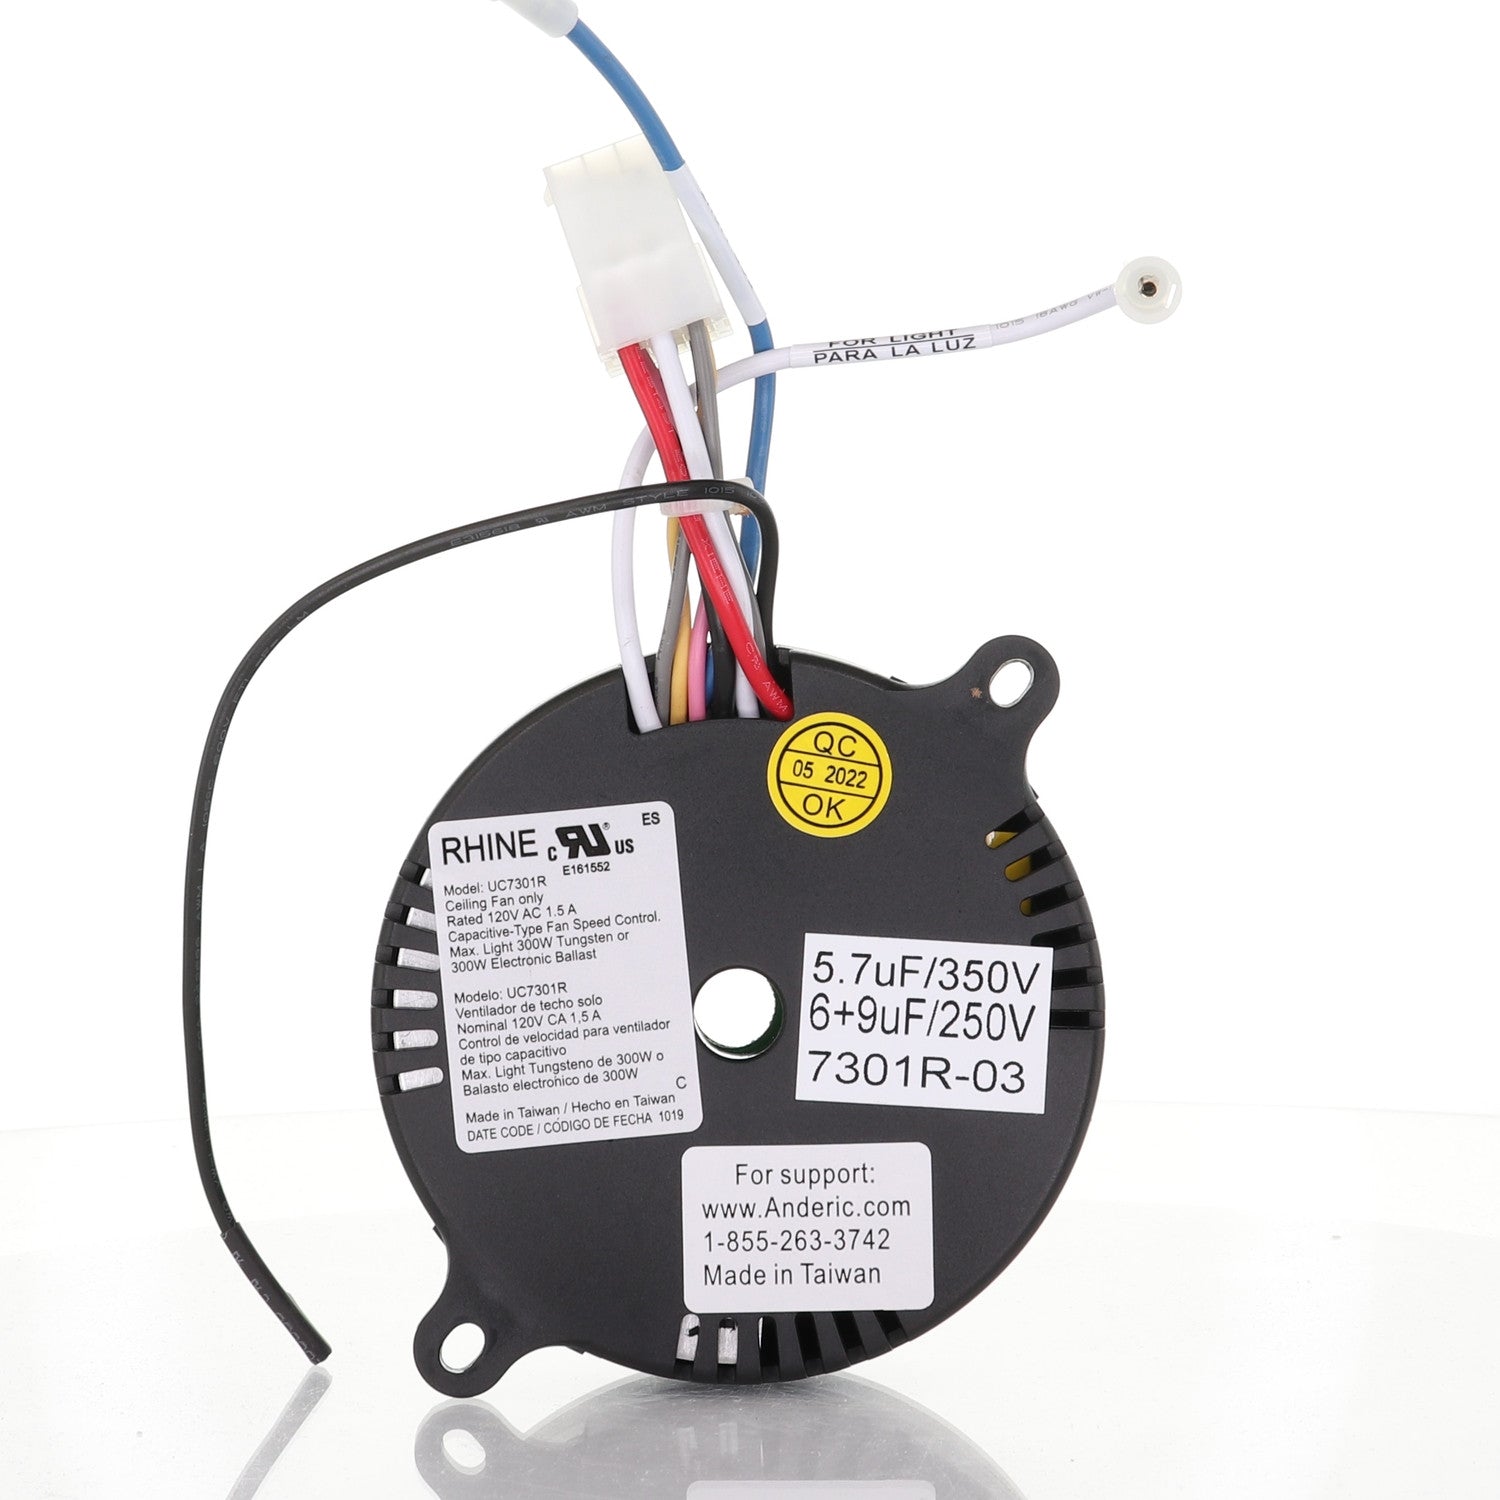 UC7301R-03 (MR77A) Replacement Ceiling Fan Receiver for Altura Ceiling Fans